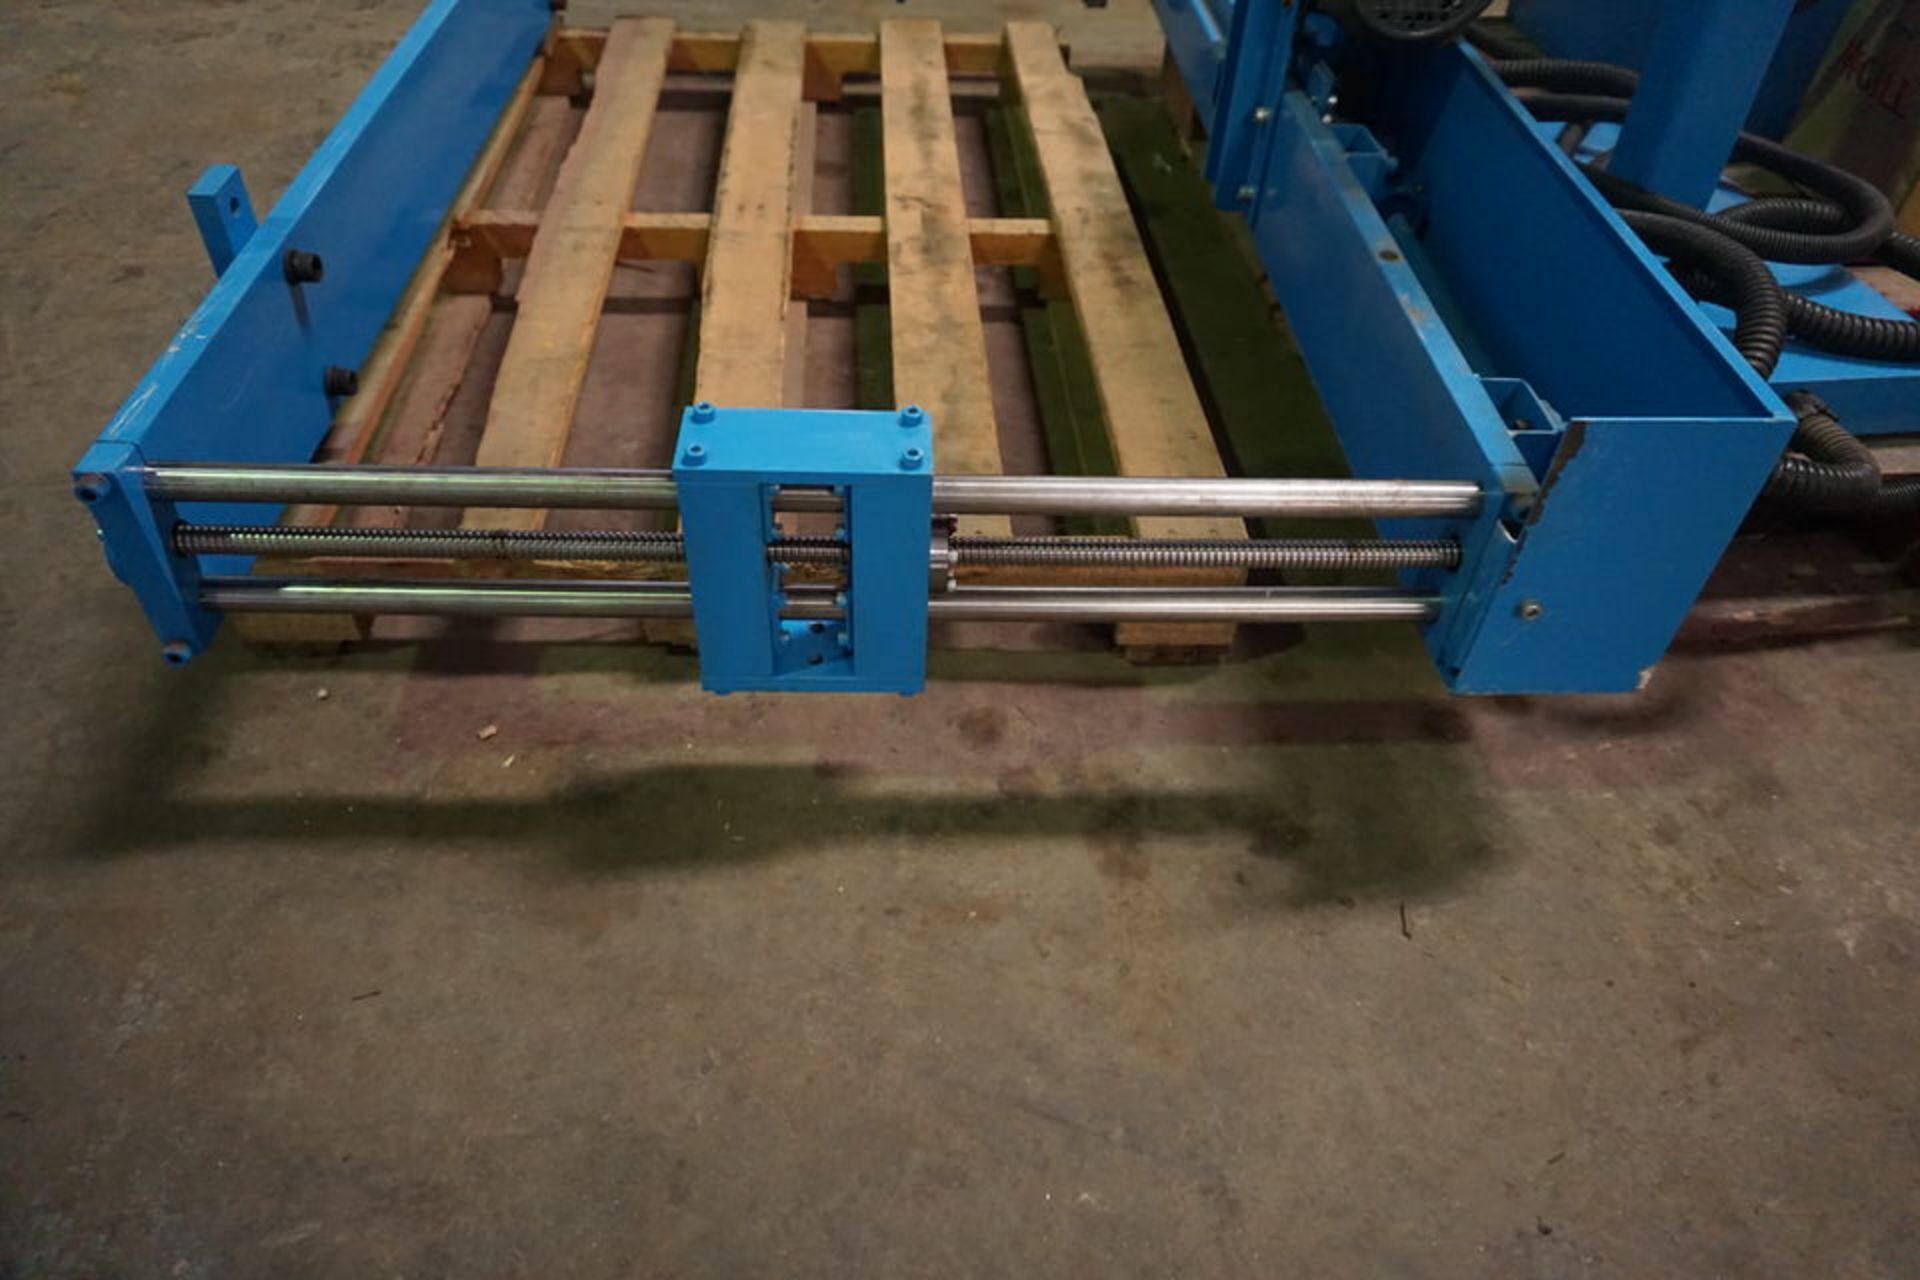 CNC BACK GAGE FOR KRASS PRESS BRAKES - Image 8 of 8